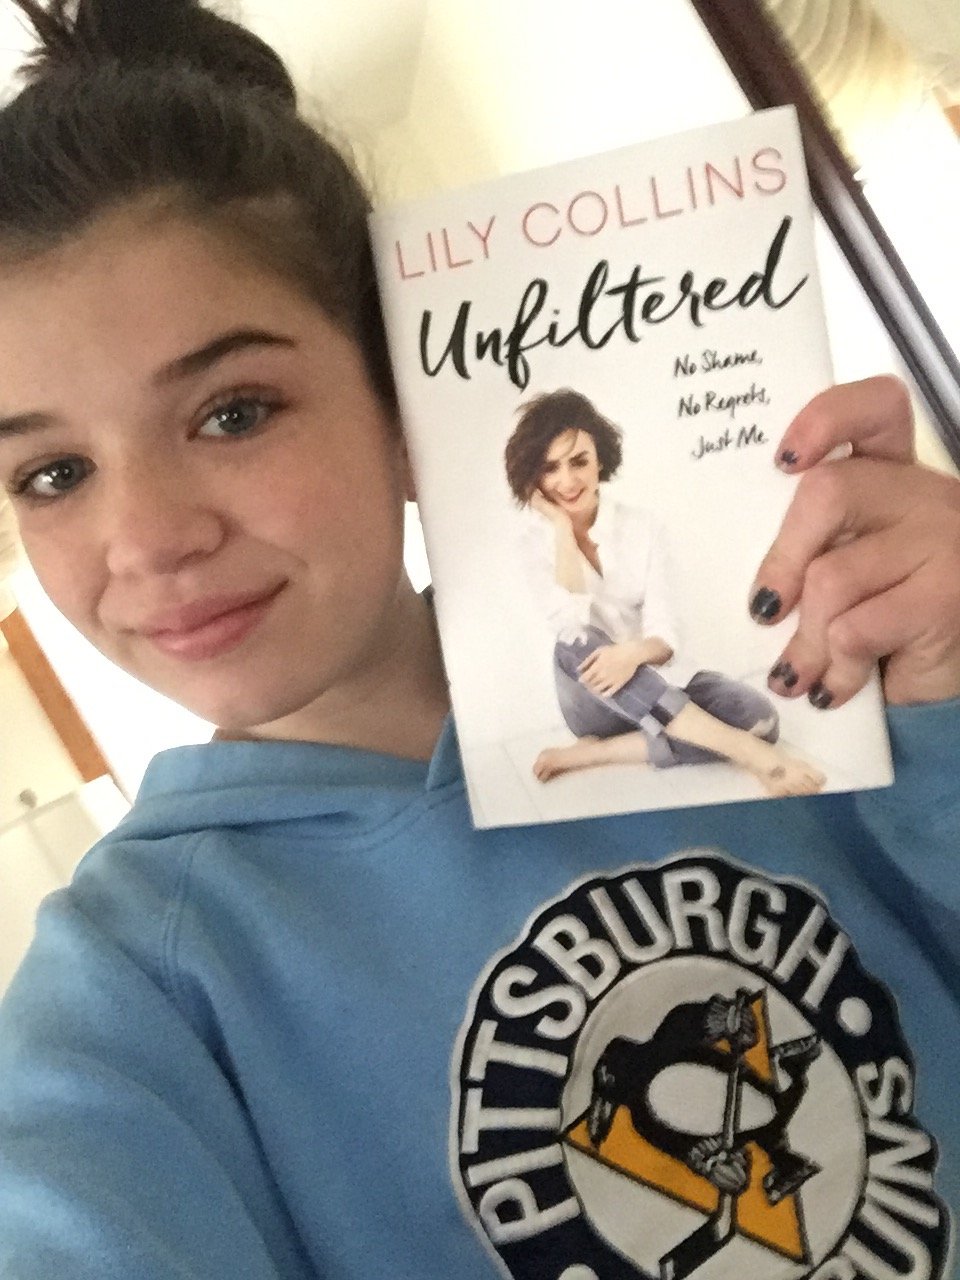 huge @lilycollins fan, reader.     rarely I tweet I just look at funny videos and follow my favorite celebrities and YouTubers.